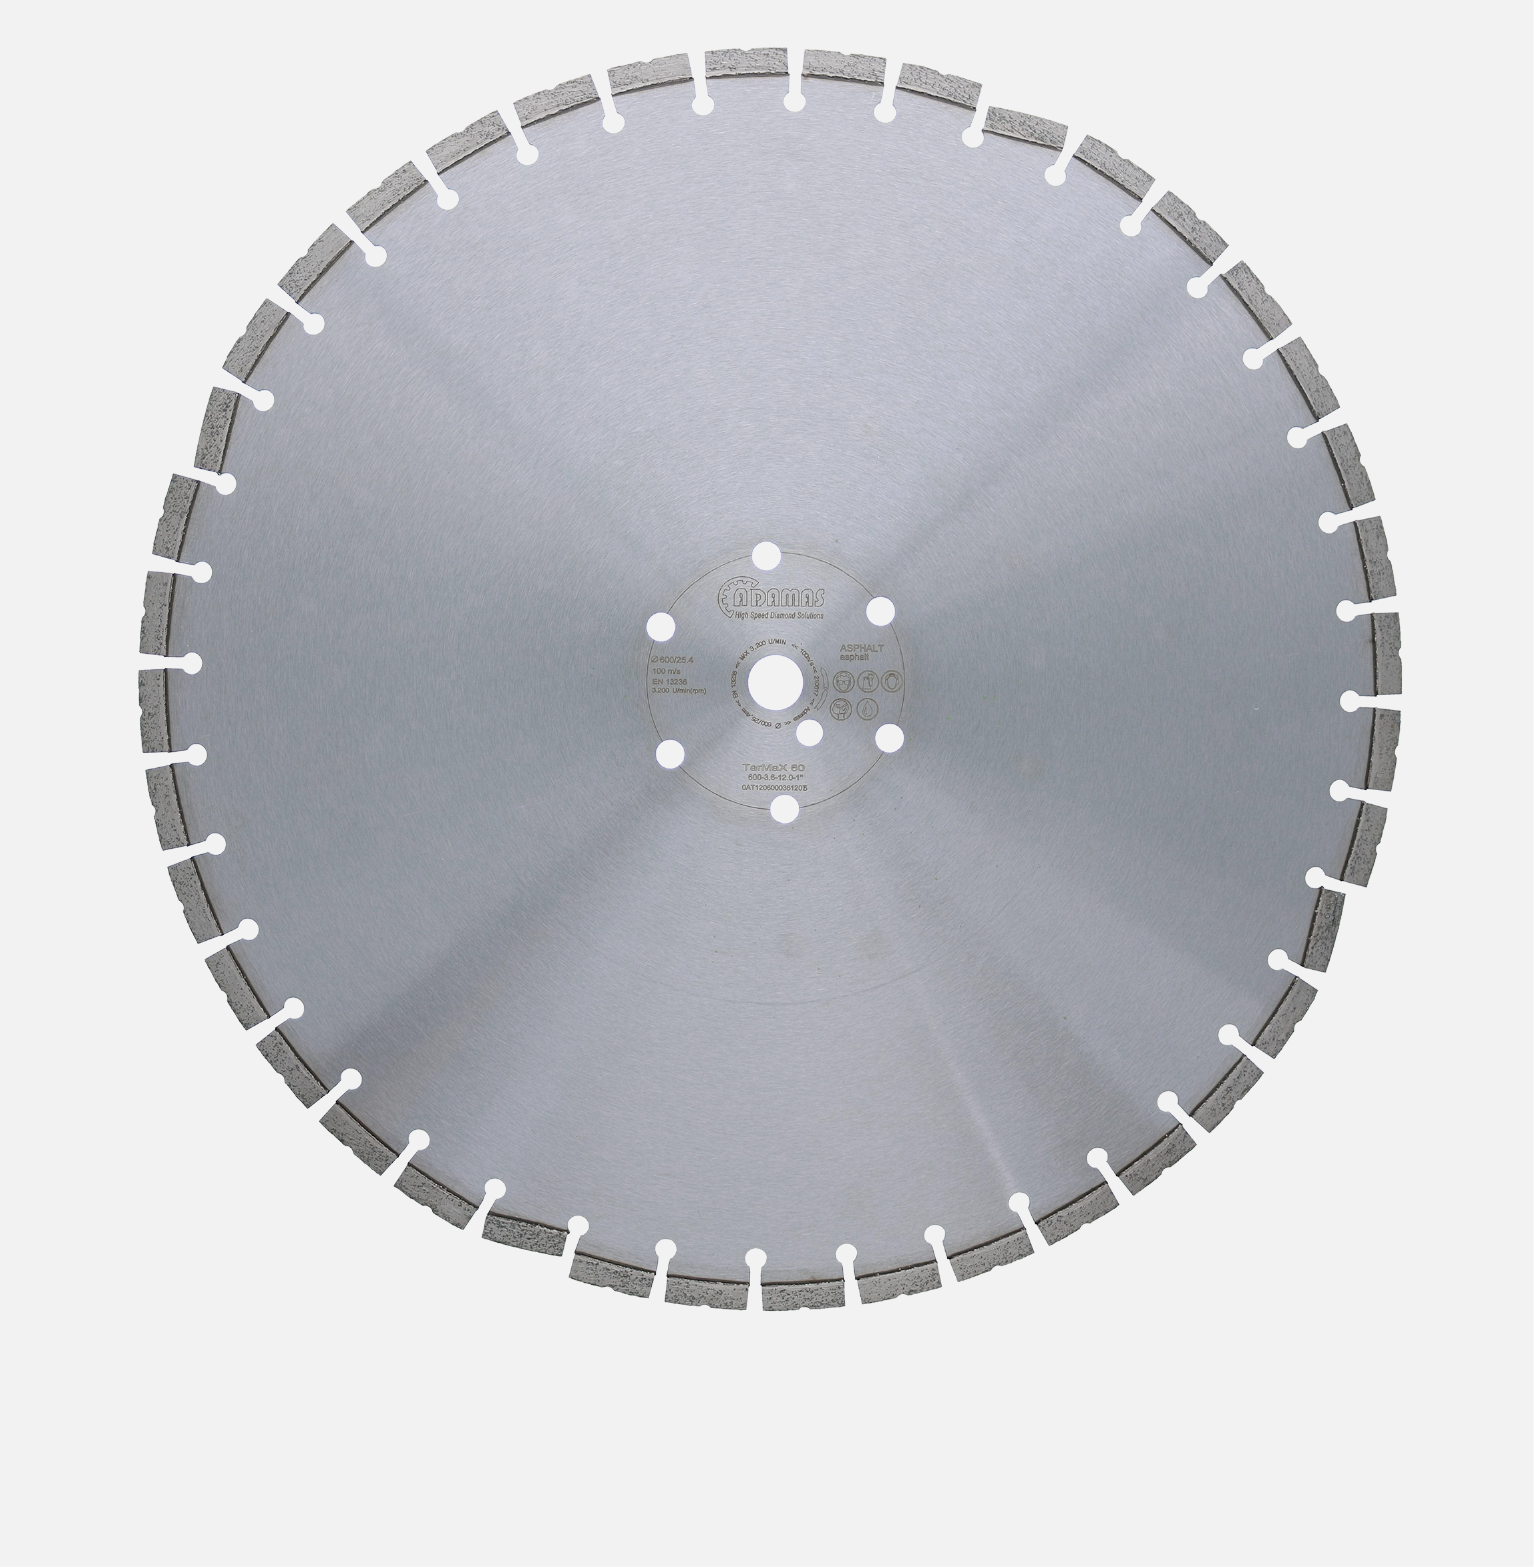 Product category - Floor saw cutting discs